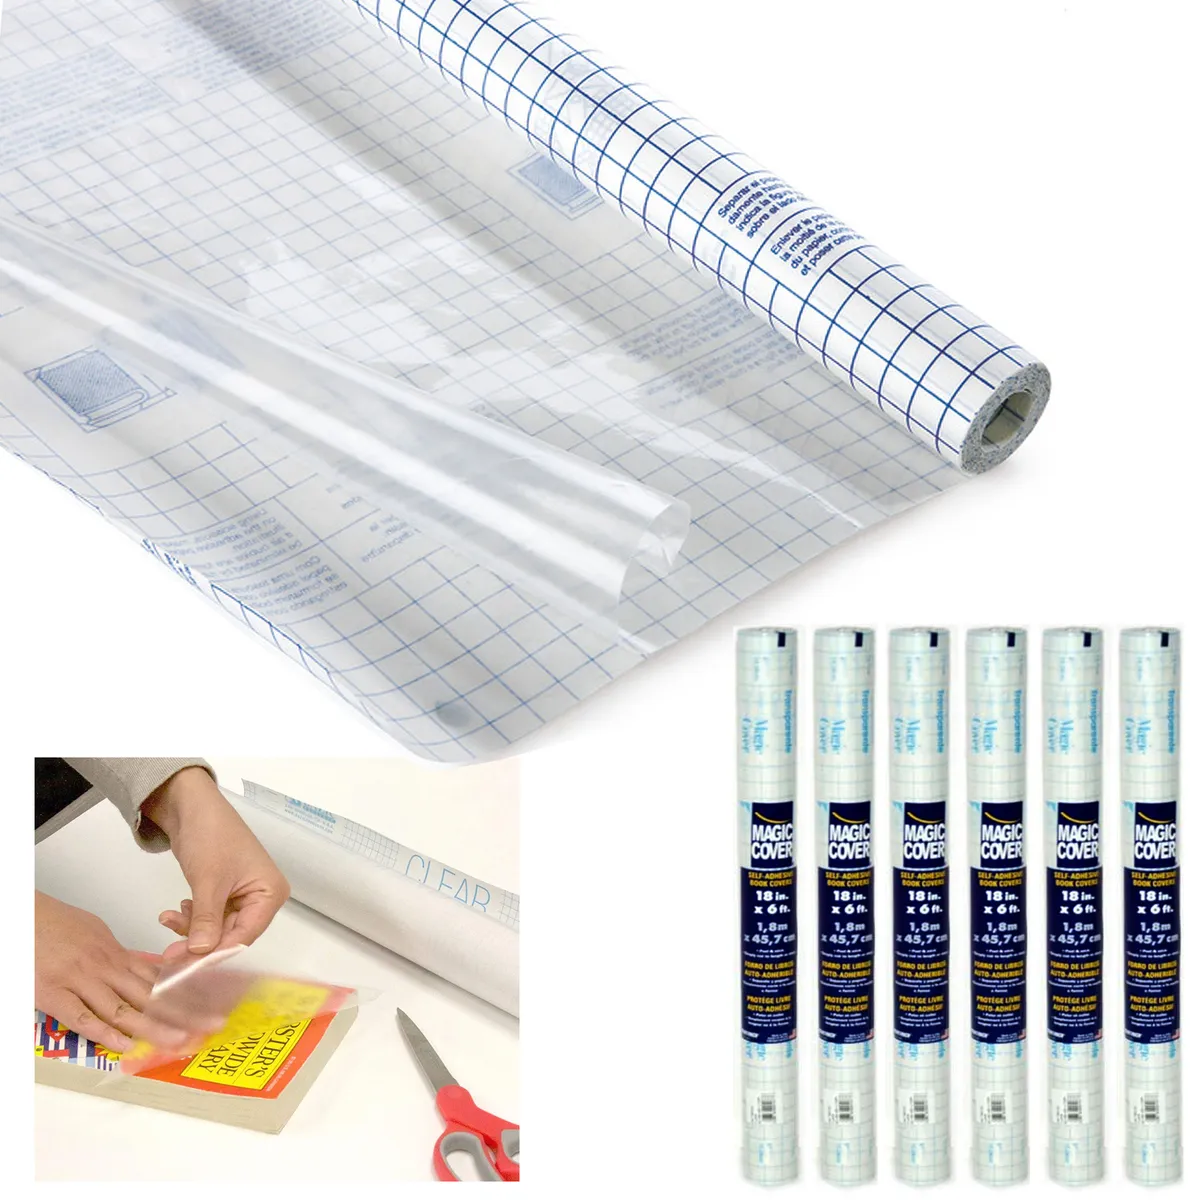 6 Rolls Clear Contact Paper Adhesive Self Stick Liner Film Cover Protect  18x6ft